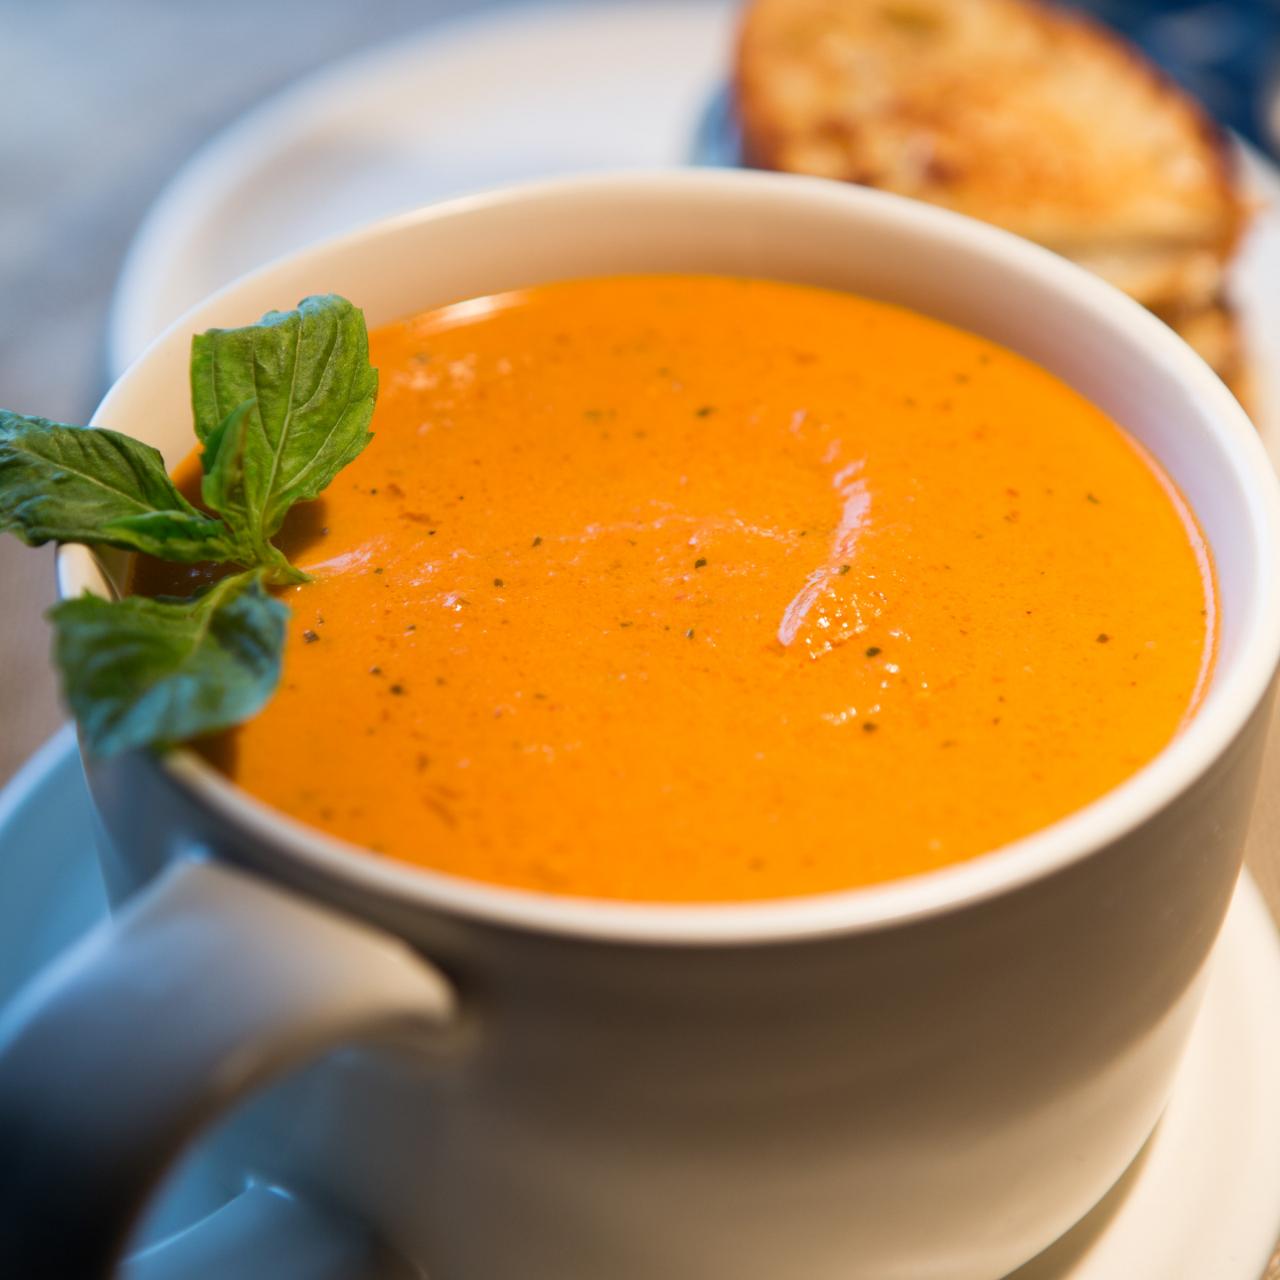 Simple Roasted Tomato Soup - Brooklyn Supper